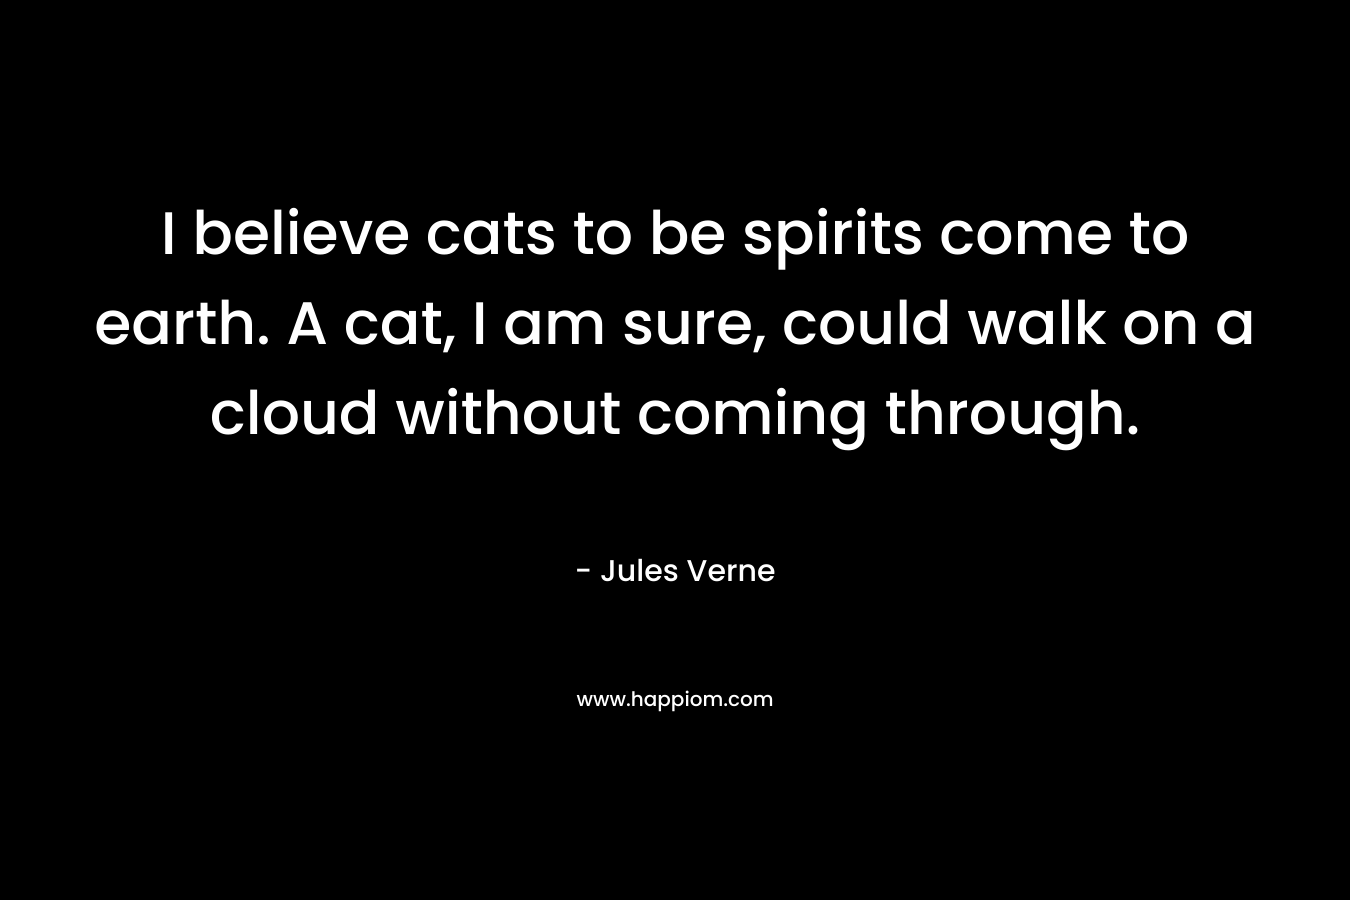 I believe cats to be spirits come to earth. A cat, I am sure, could walk on a cloud without coming through. – Jules Verne